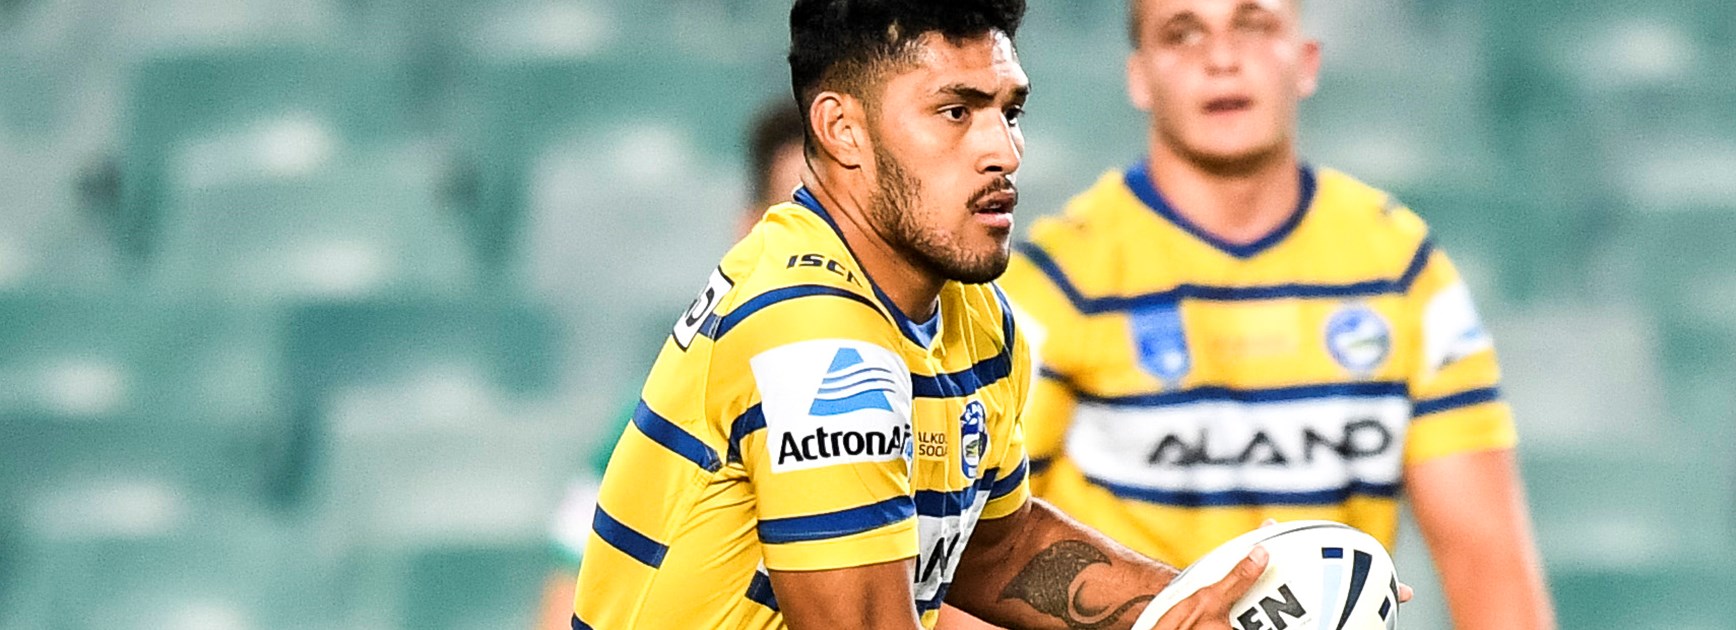 Eels Jersey Flegg make statement with win over Dragons